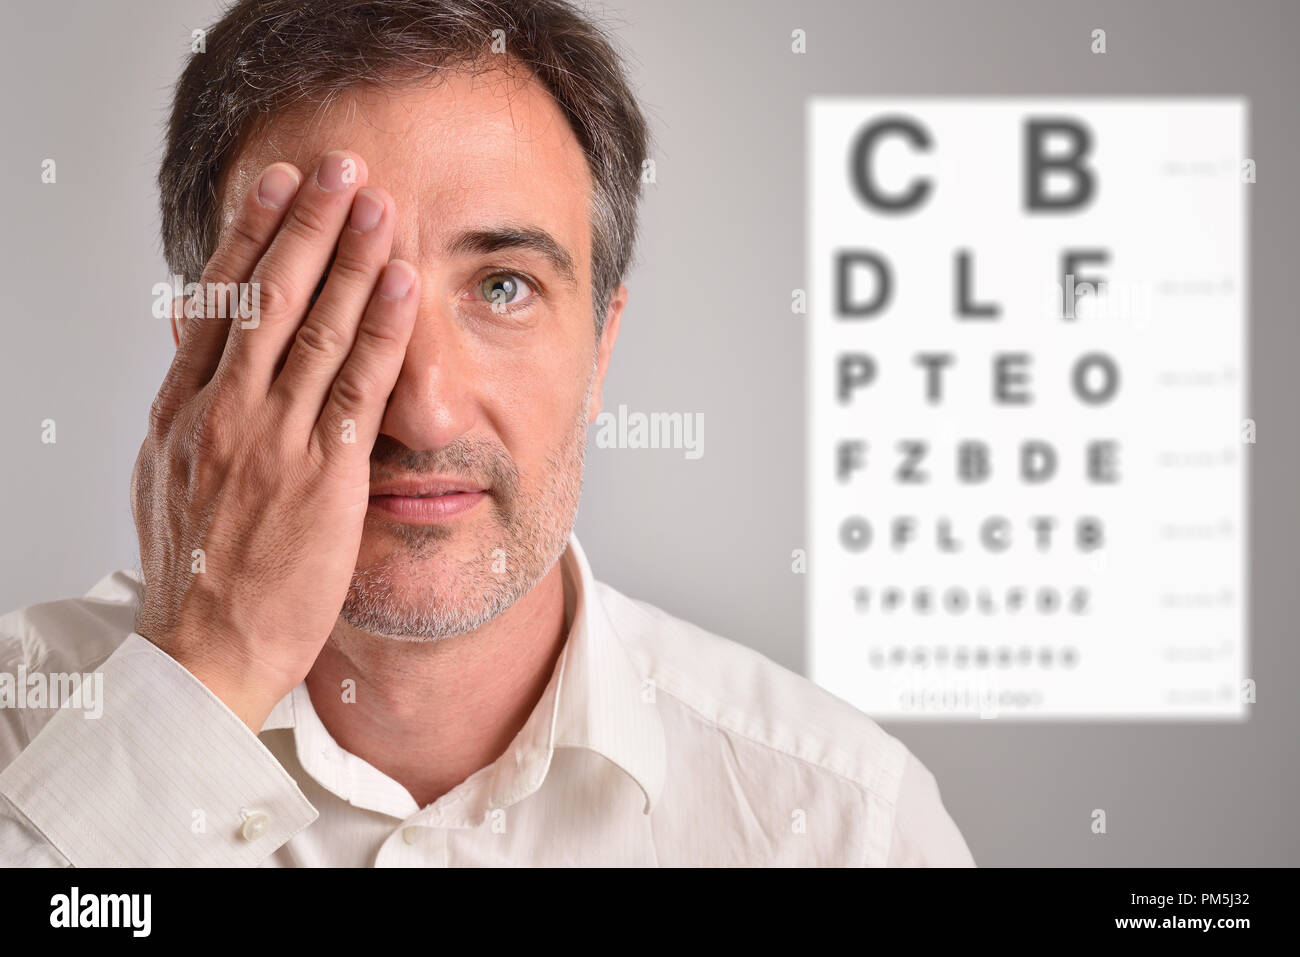 Middle-aged man covering an eye for optical revision with letter chart in the background. Horizontal composition Stock Photo